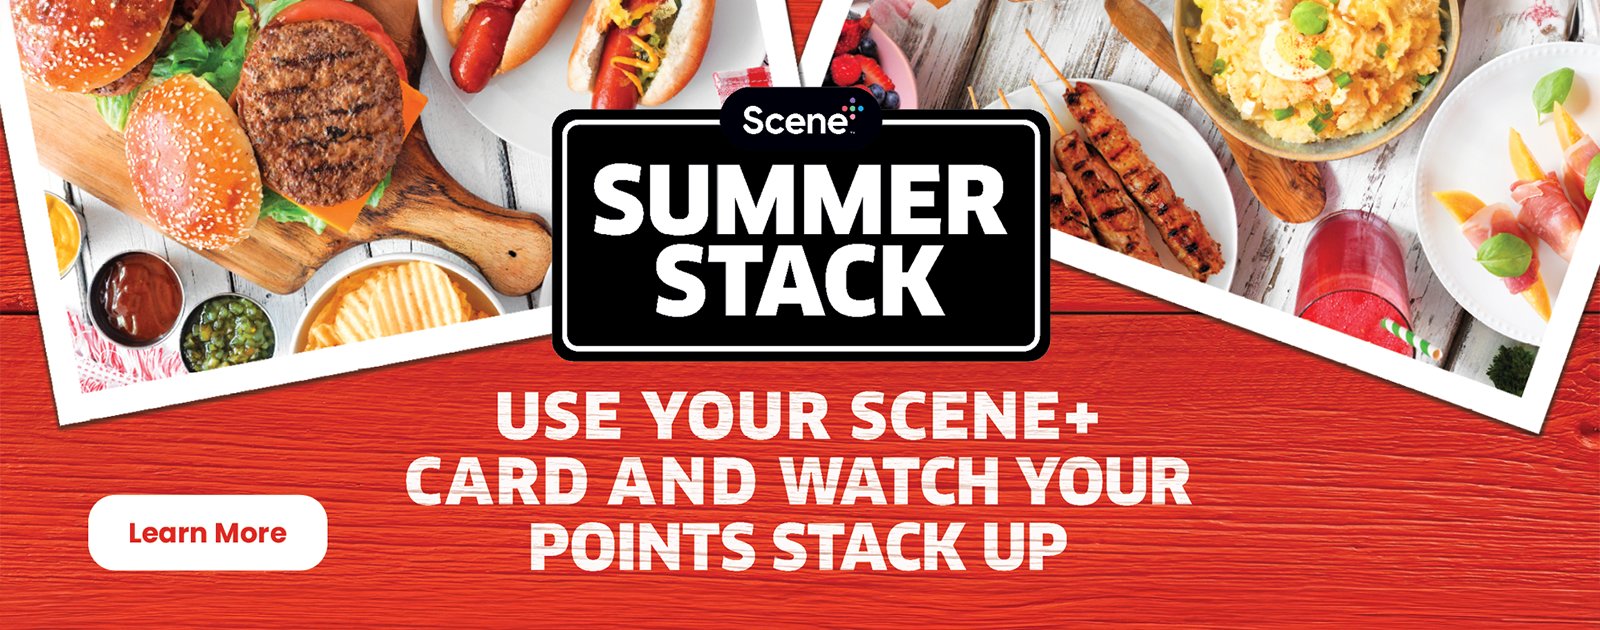 Use your Scene+ card and watch your points stack up